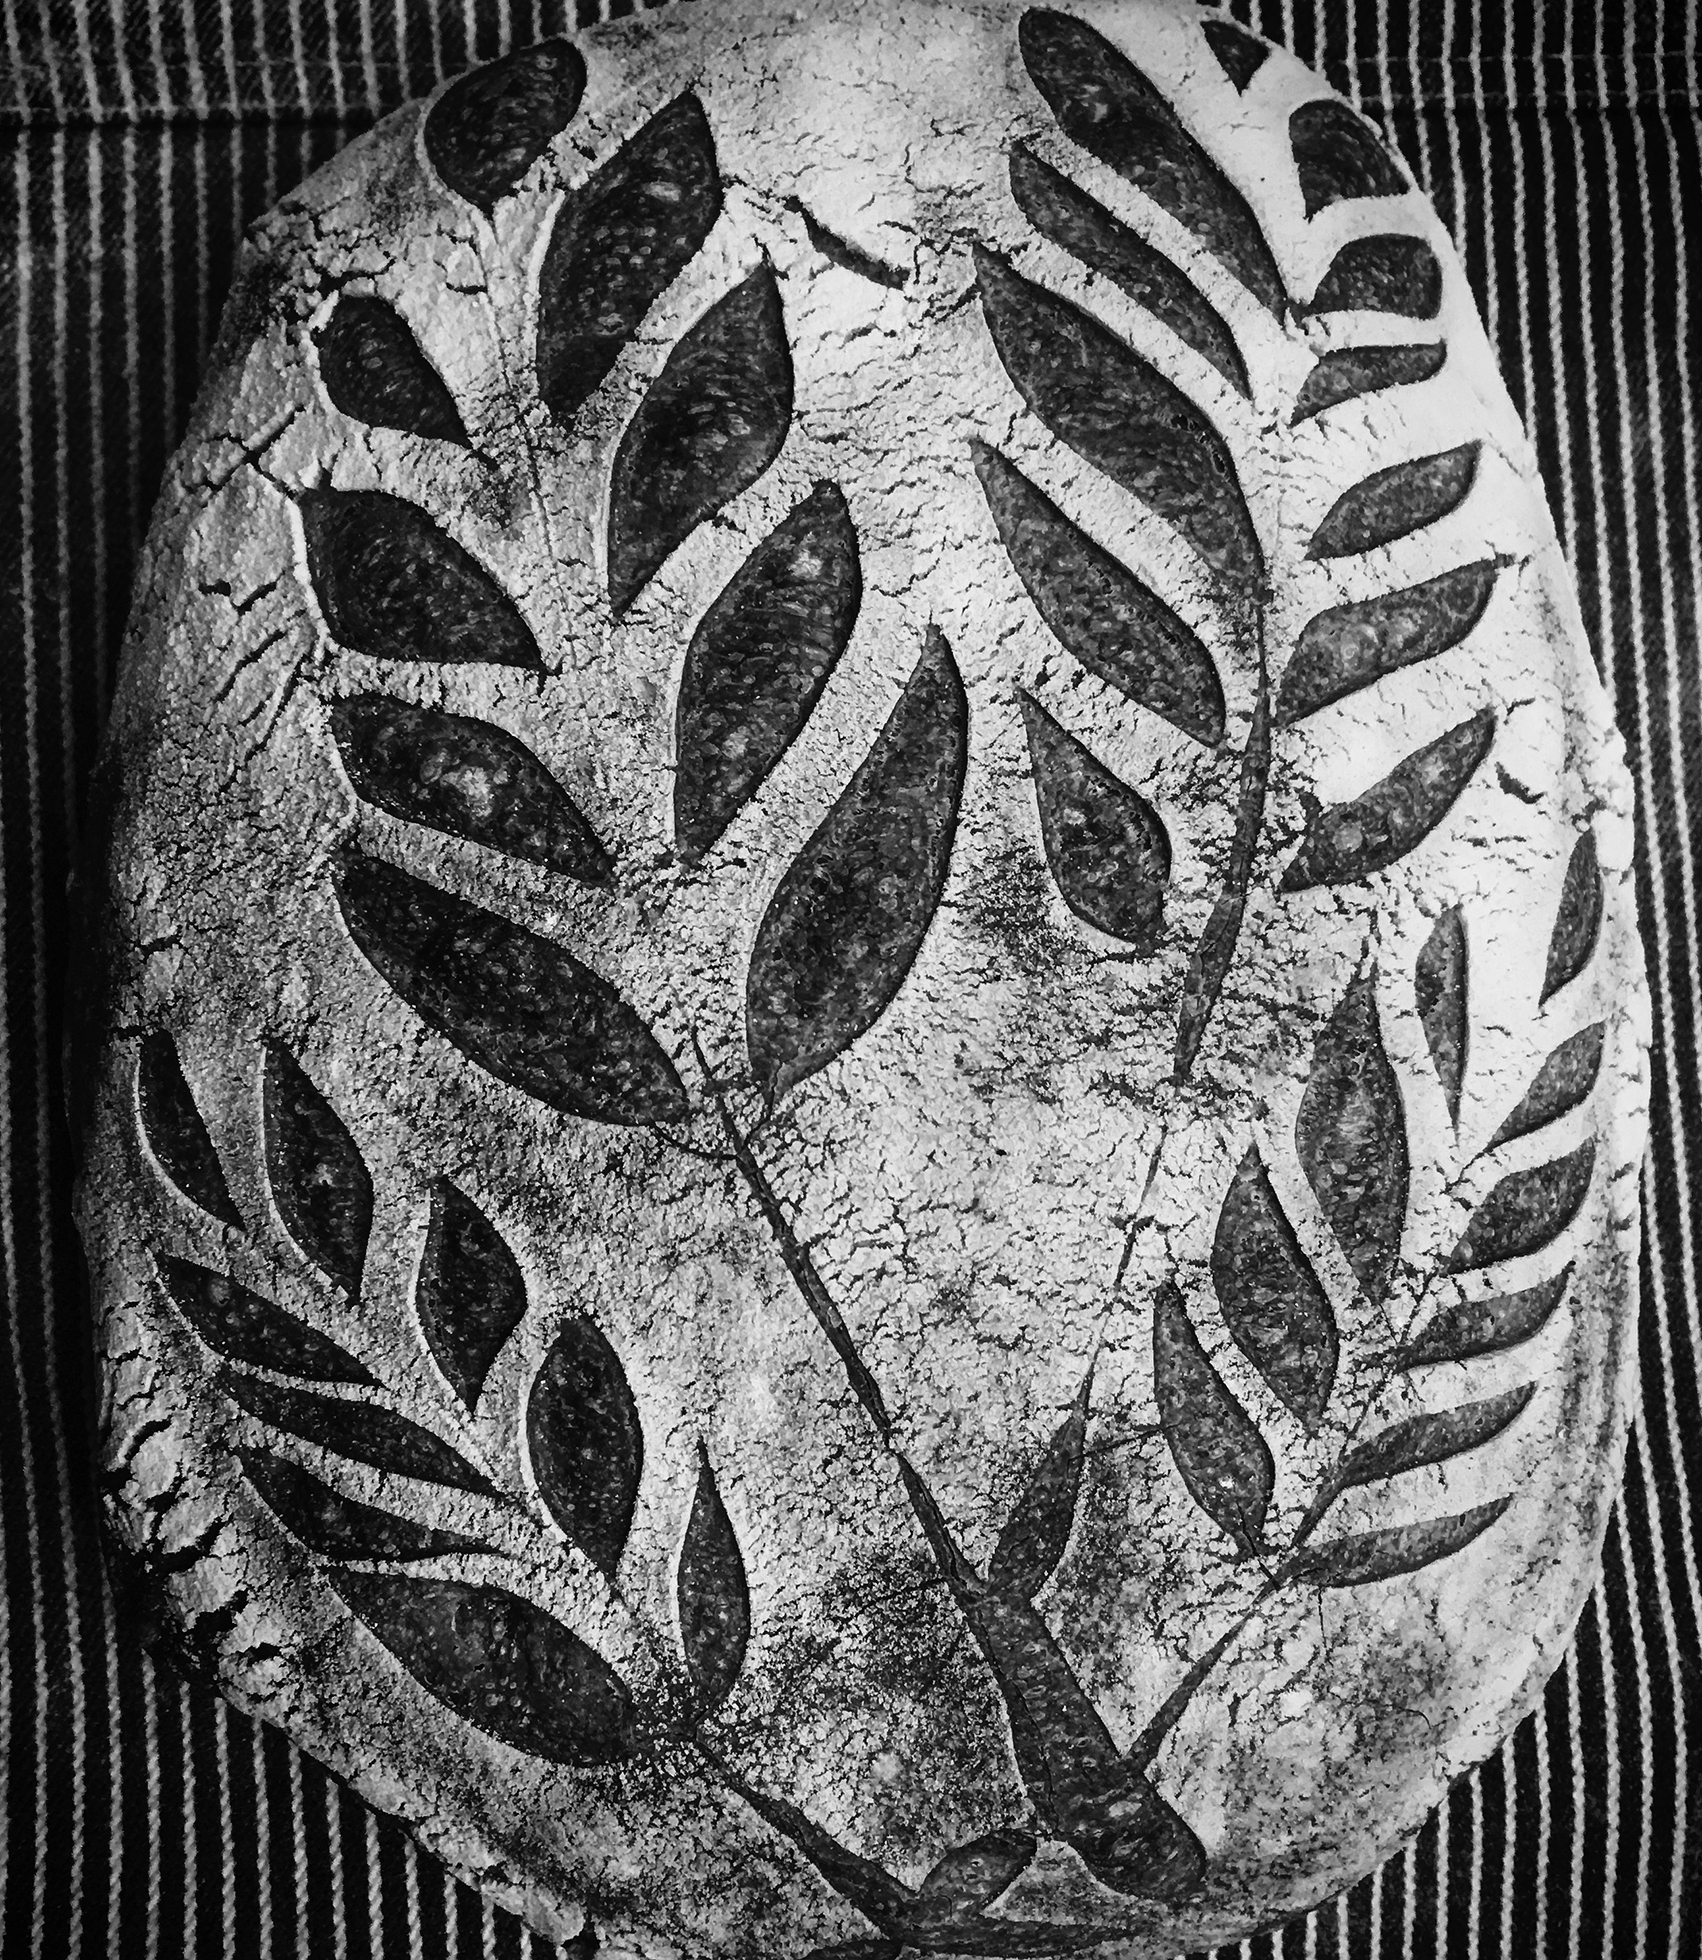 An artisan loaf of bread with stenciled leaves on the crust.